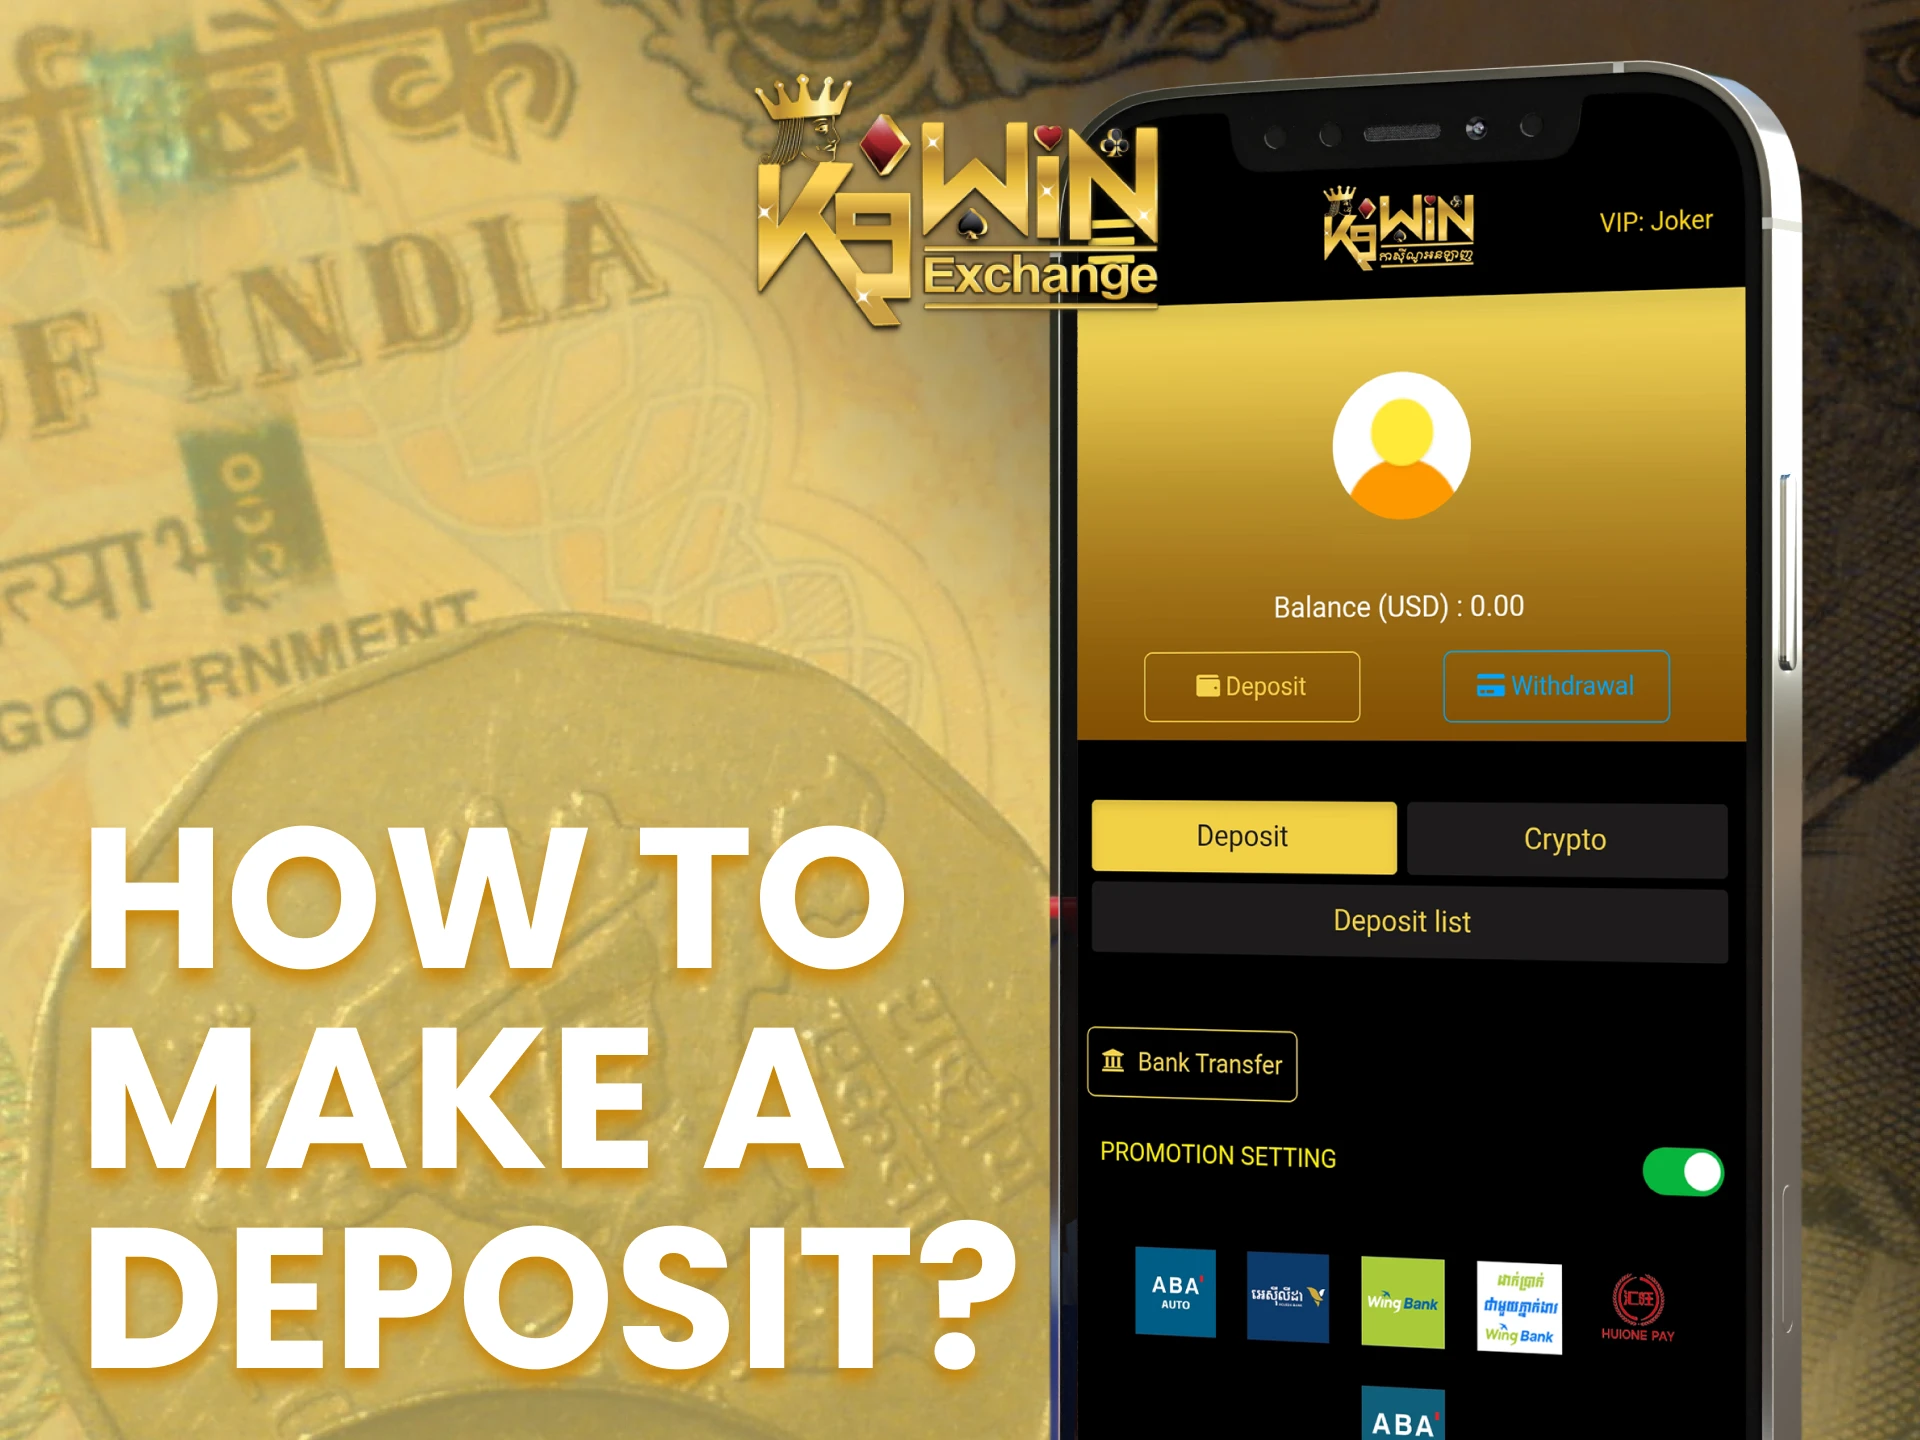 Make the first deposit in the K9Win app.